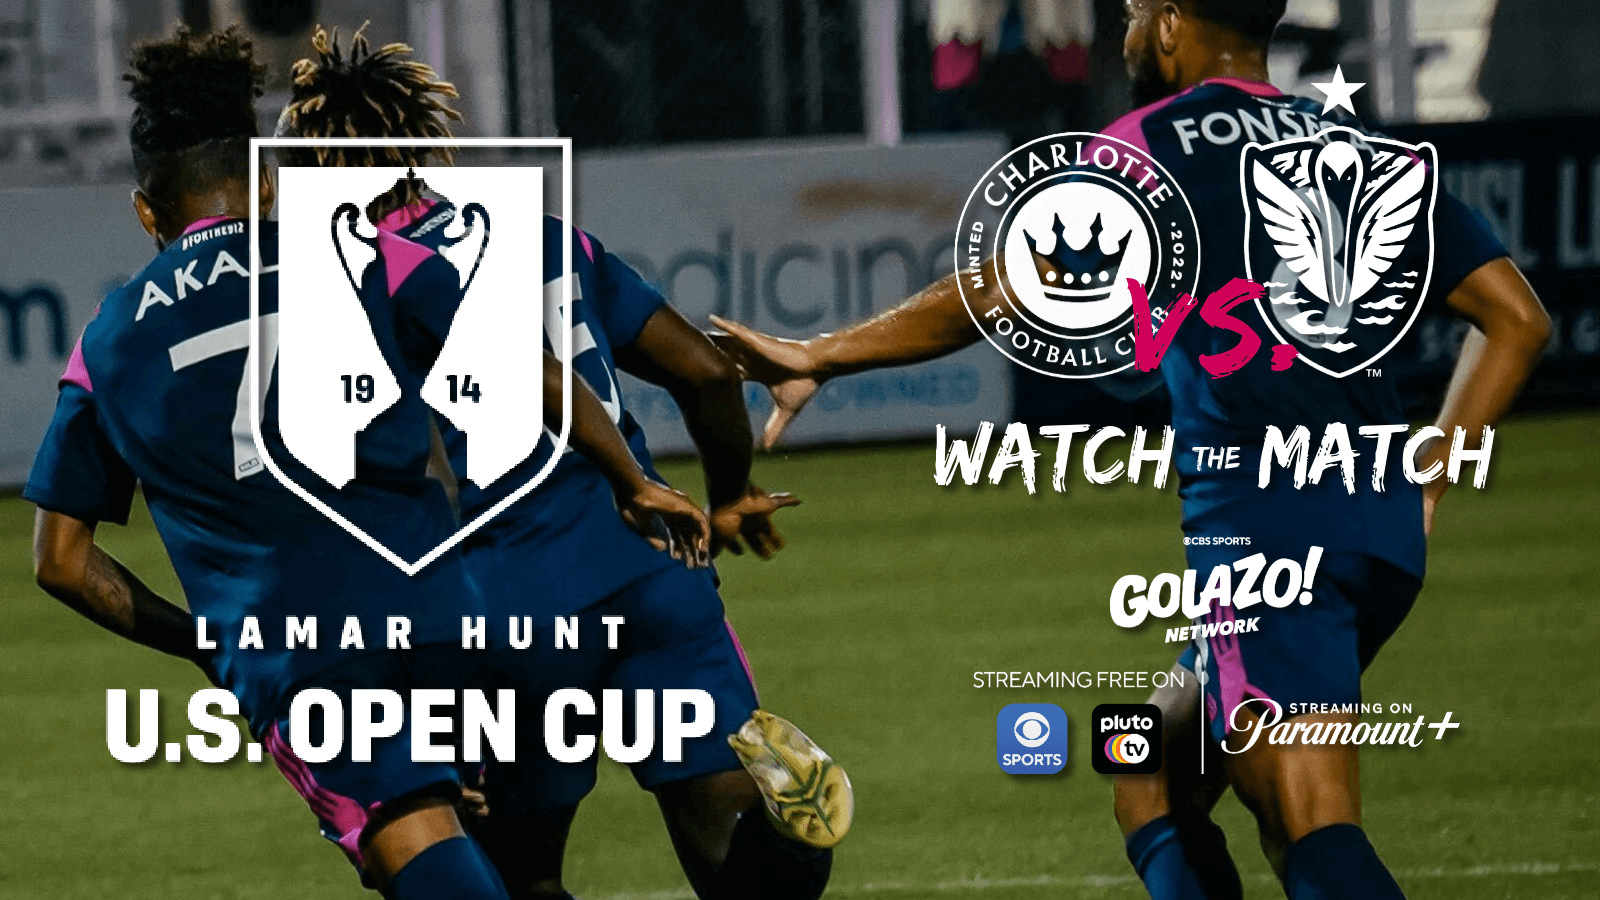 CBS Sports Golazo Network to Provide Live Match Coverage of Lamar Hunt U.S. Open Cup Match Featuring Tormenta FC at Charlotte FC featured image